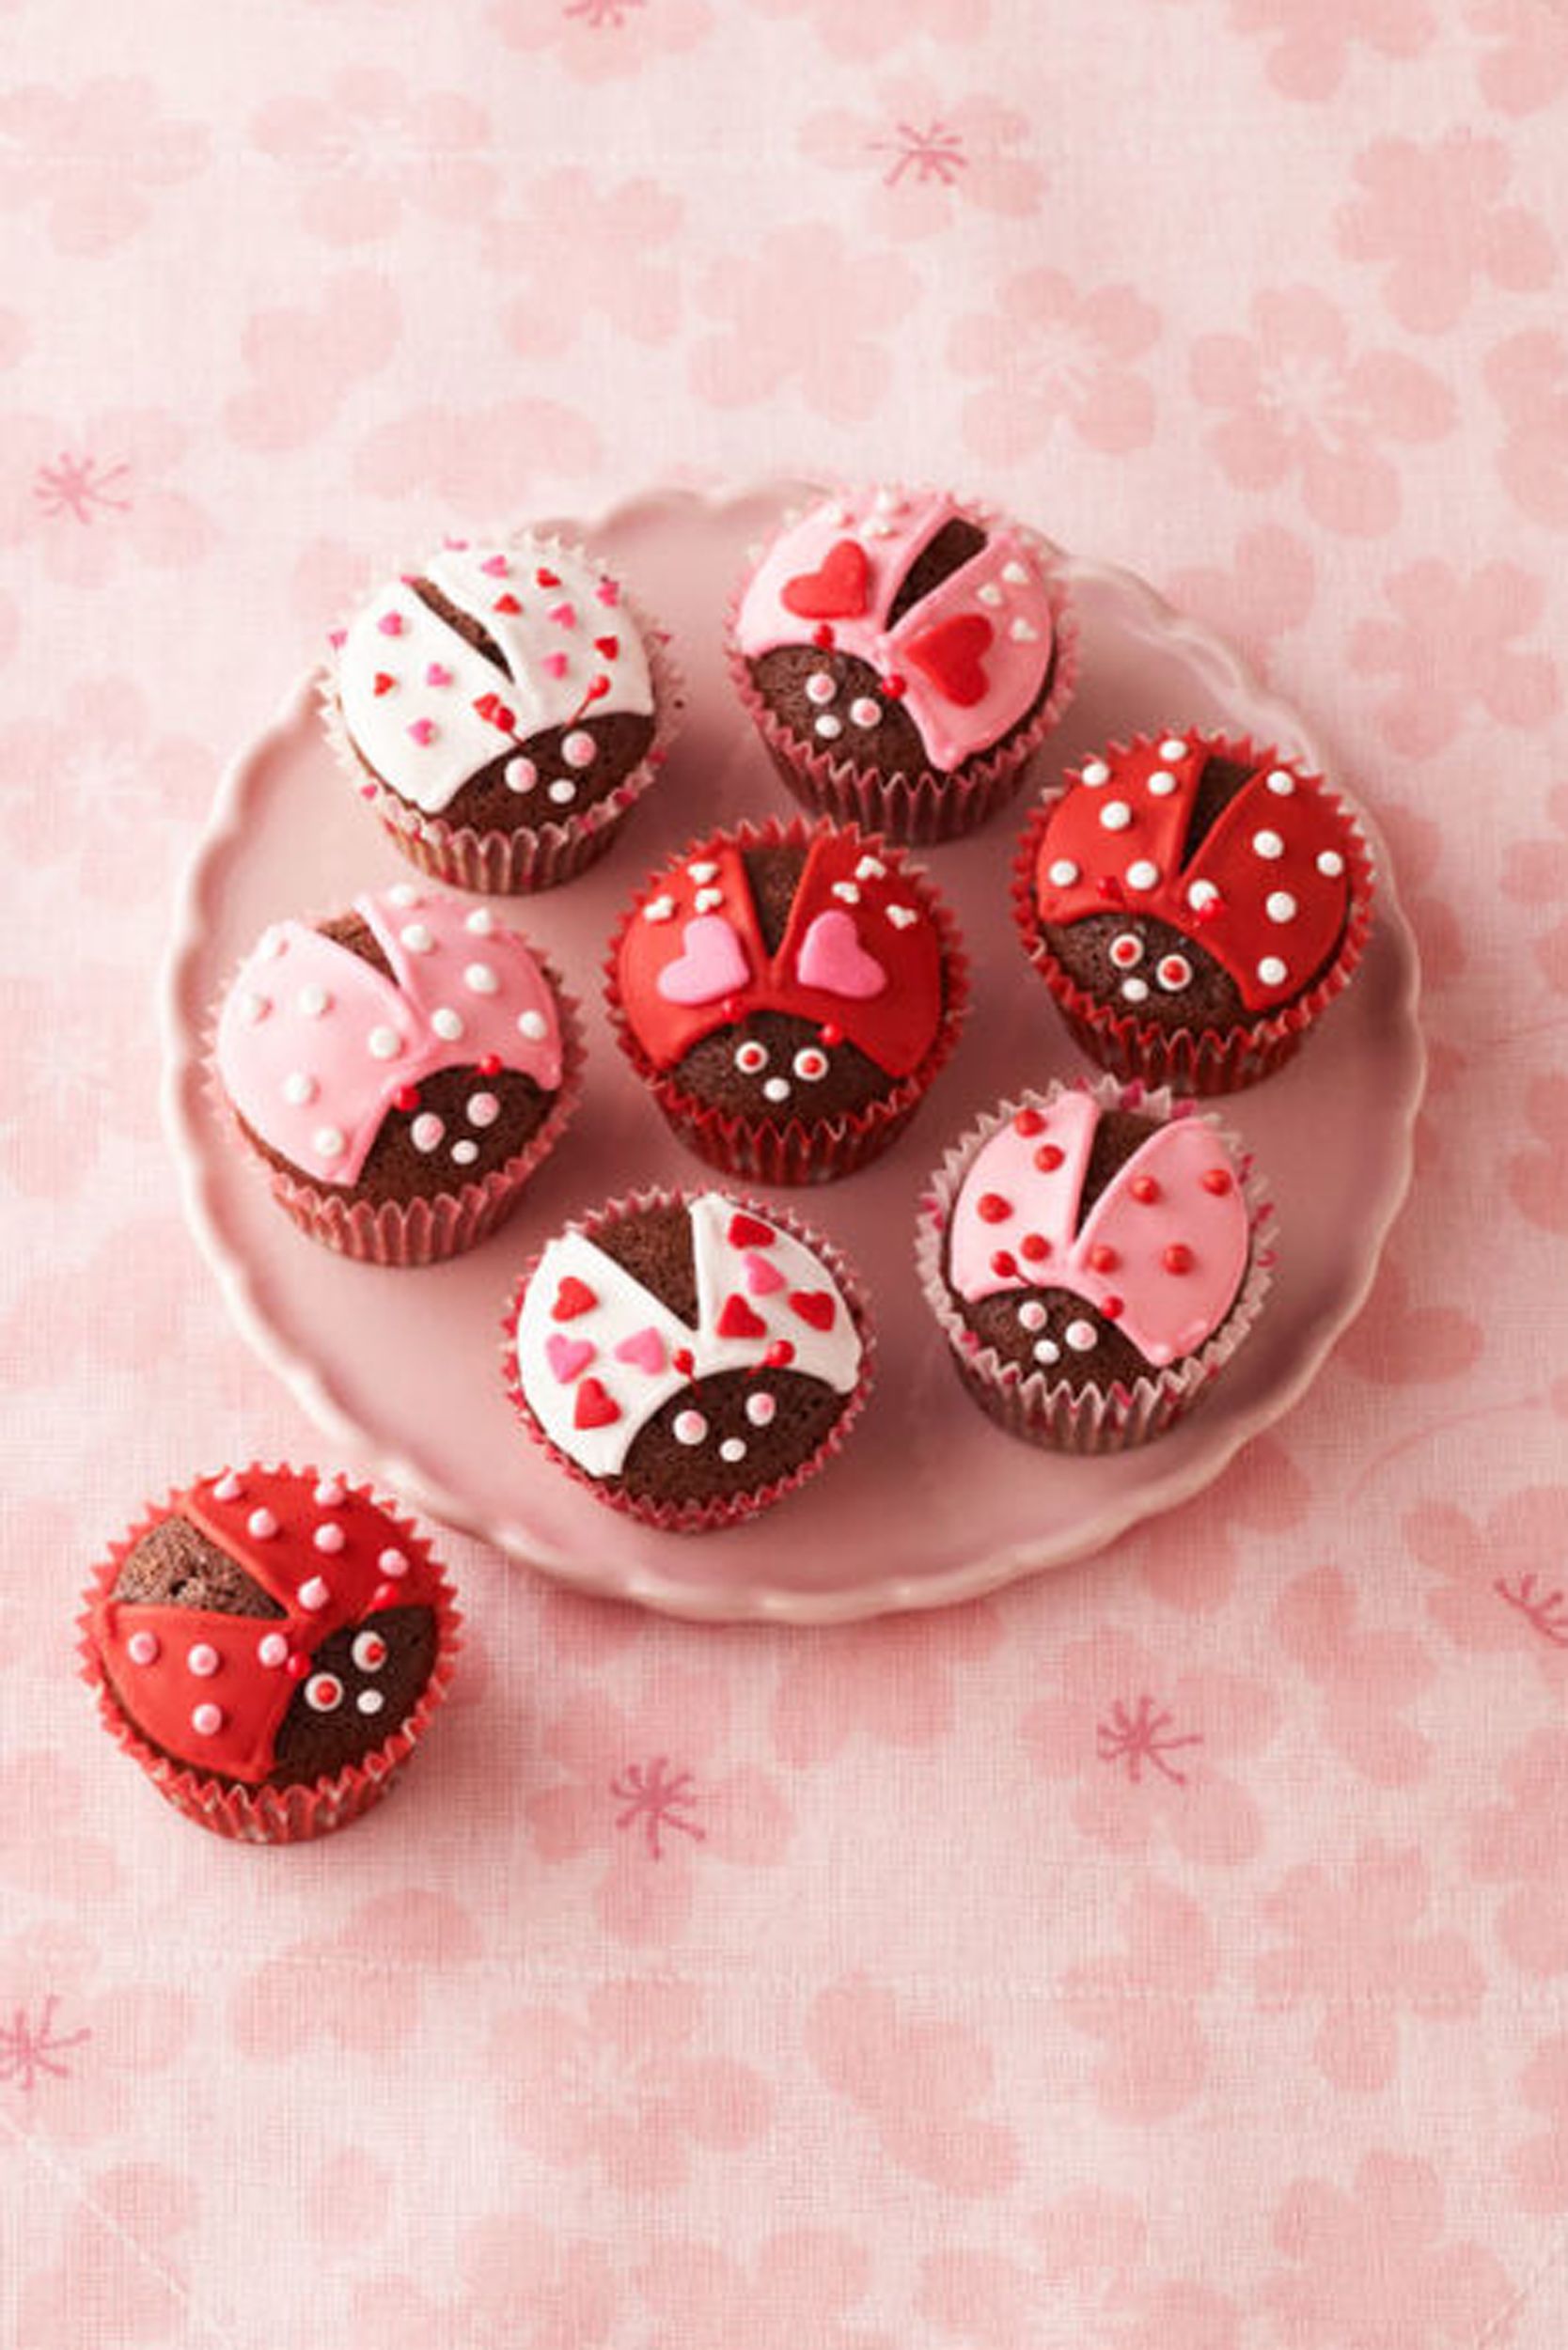 35 Valentine's Day Desserts That Are Just Too Cute | Taste of Home